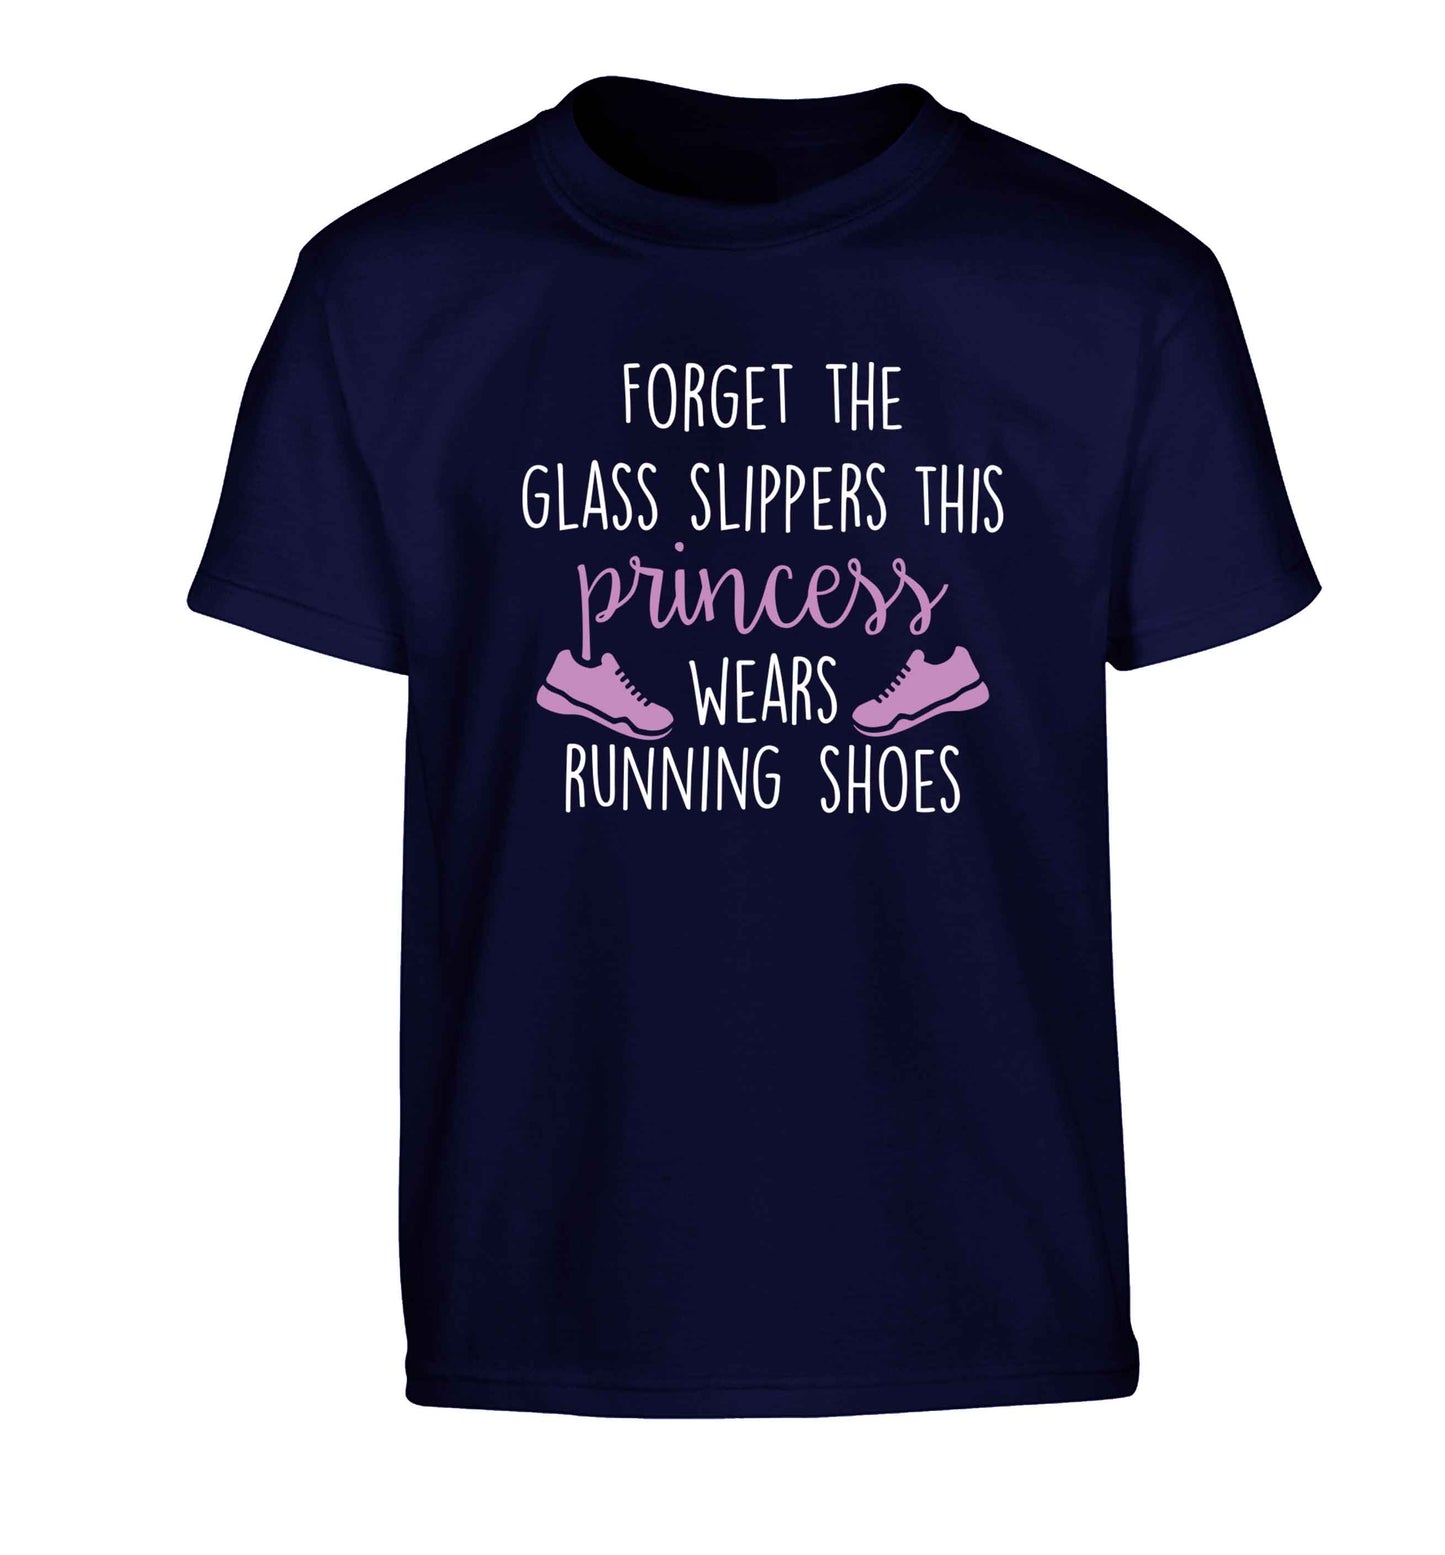 Forget the glass slippers this princess wears running shoes Children's navy Tshirt 12-13 Years